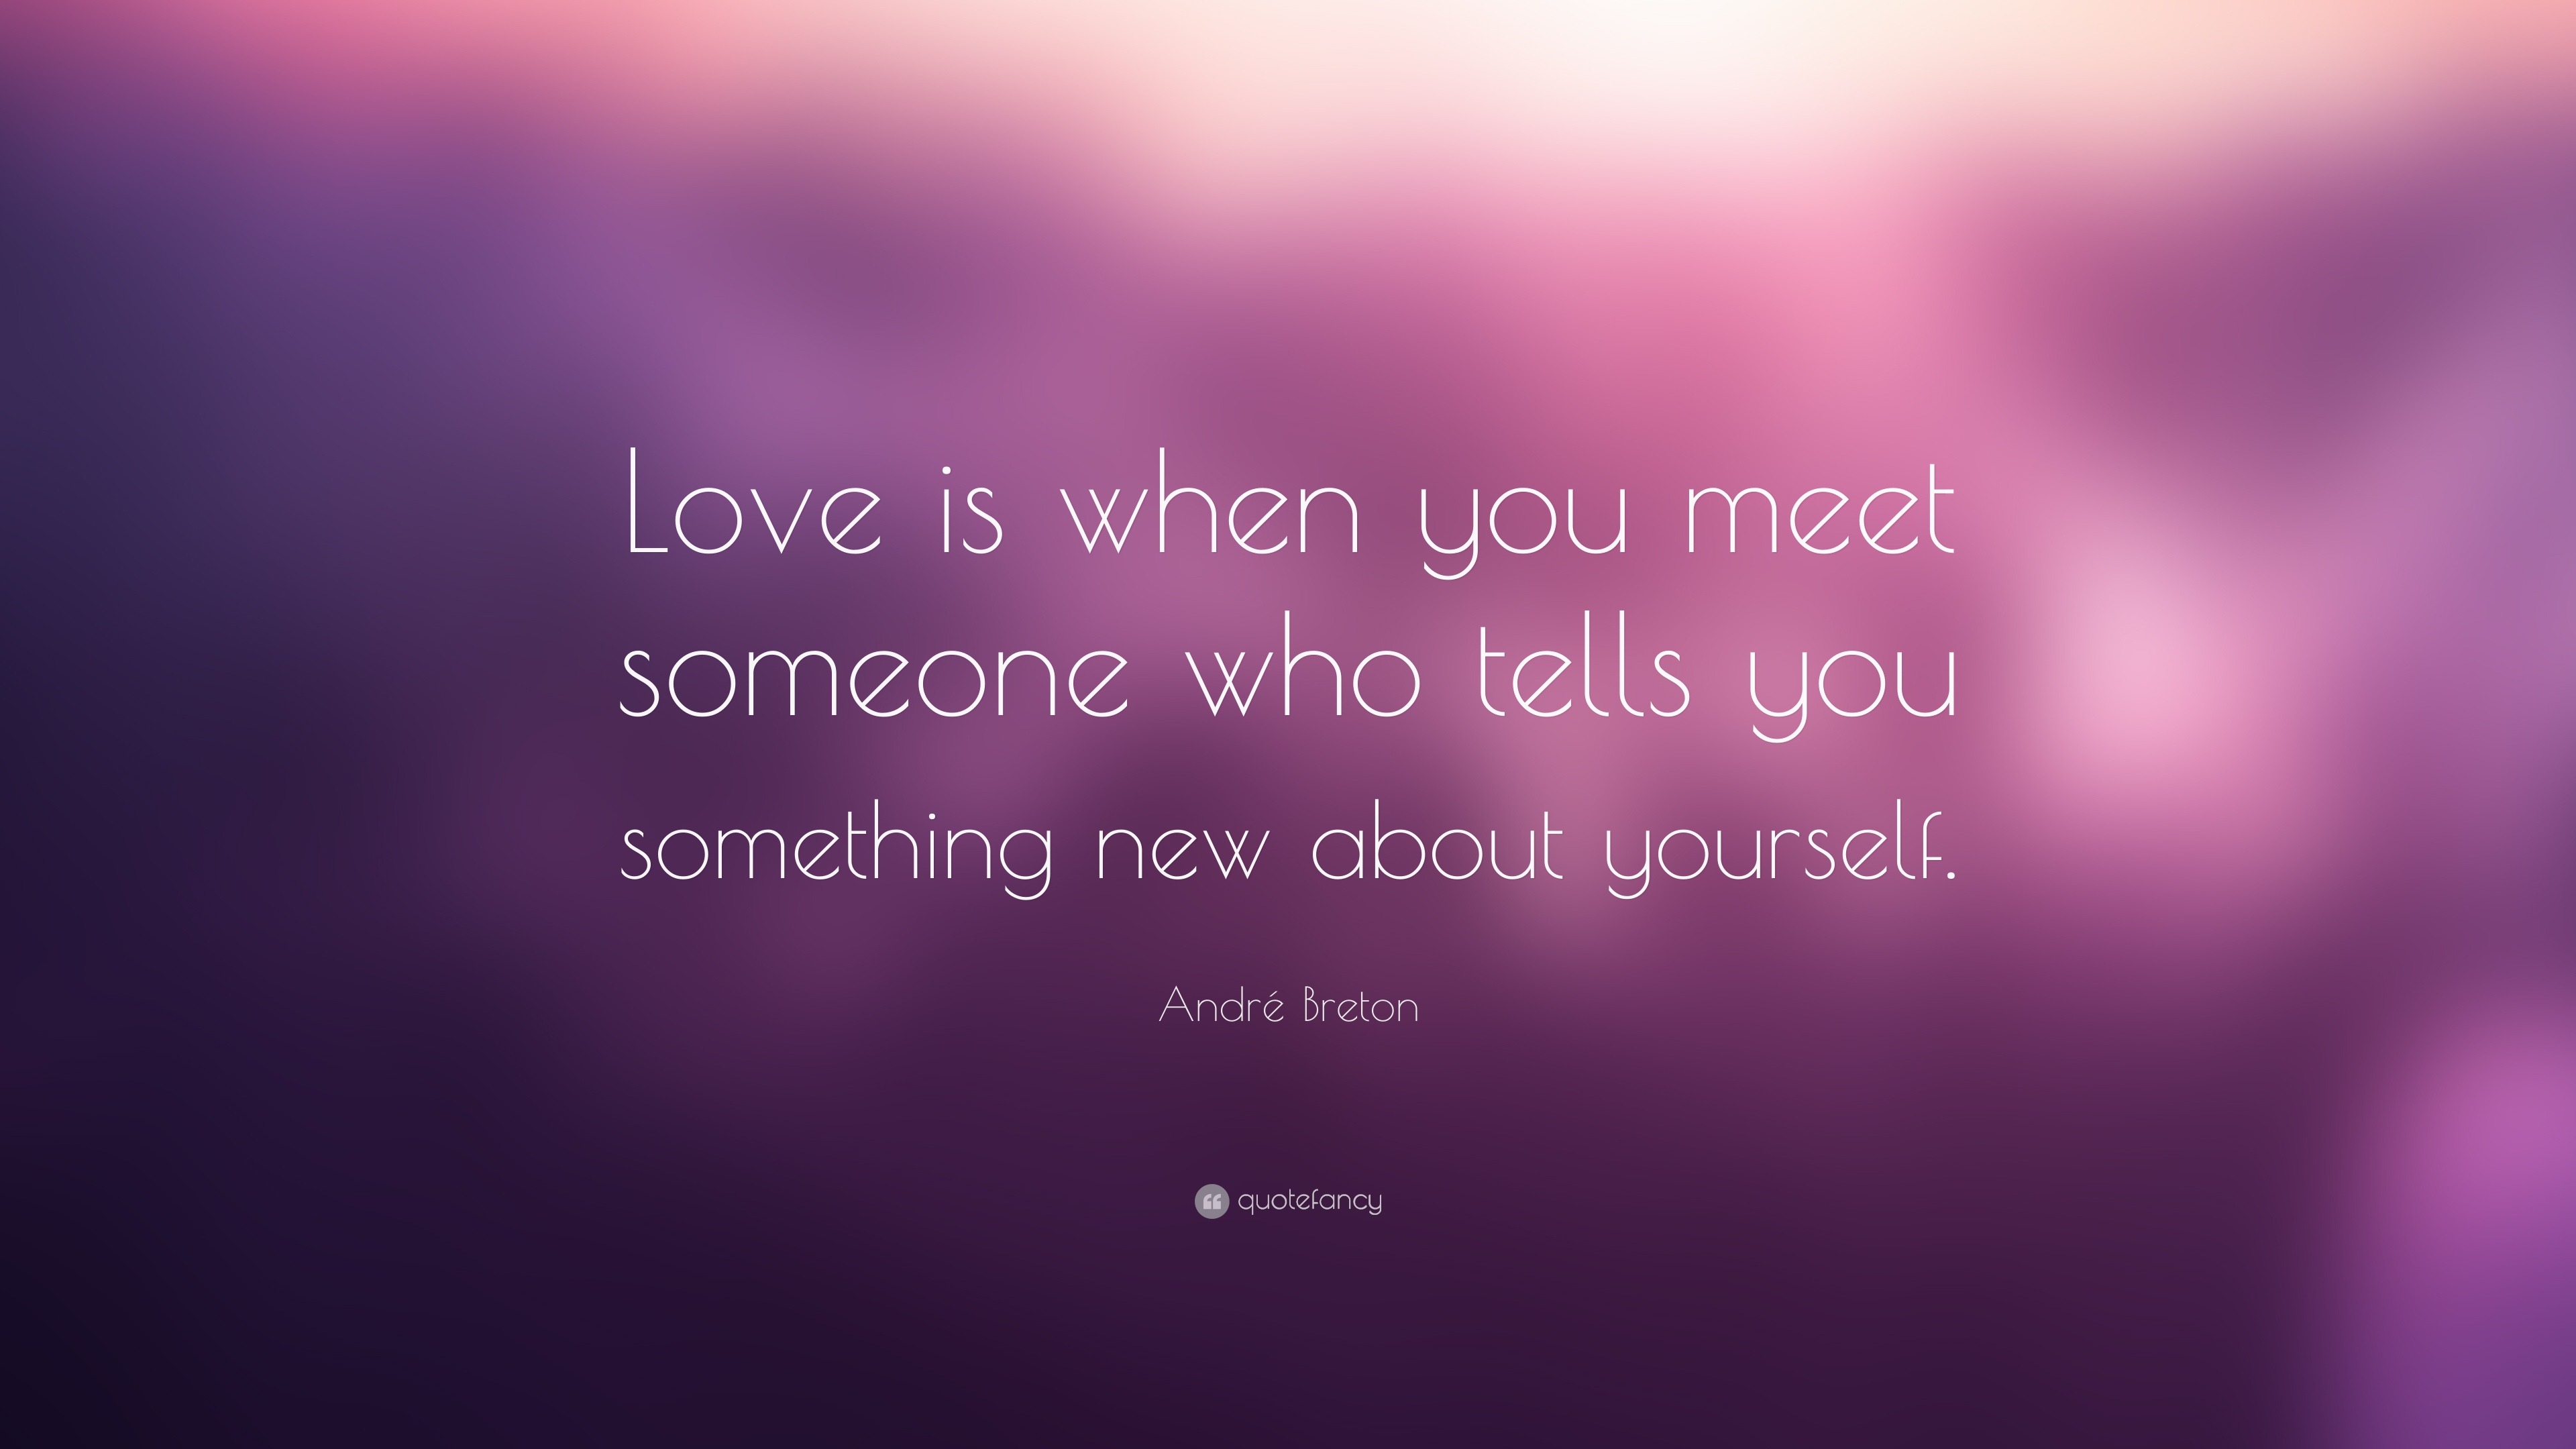 Relationship Quotes “Love is when you meet someone who tells you something new about